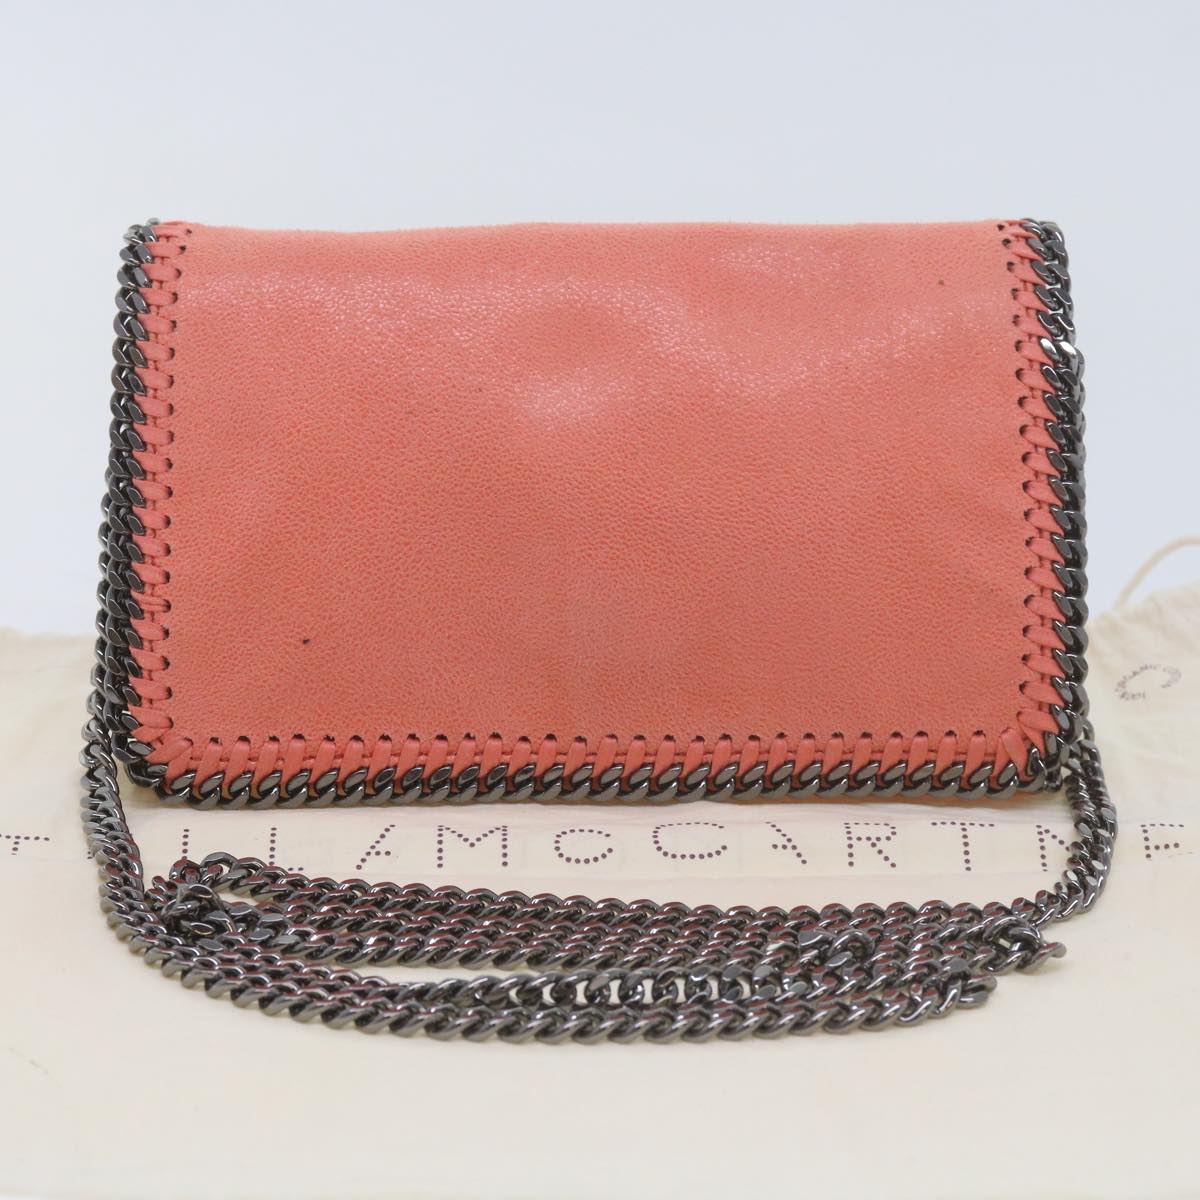 Stella MacCartney Quilted Chain Falabella Shoulder Bag Suede Orange Auth 59748